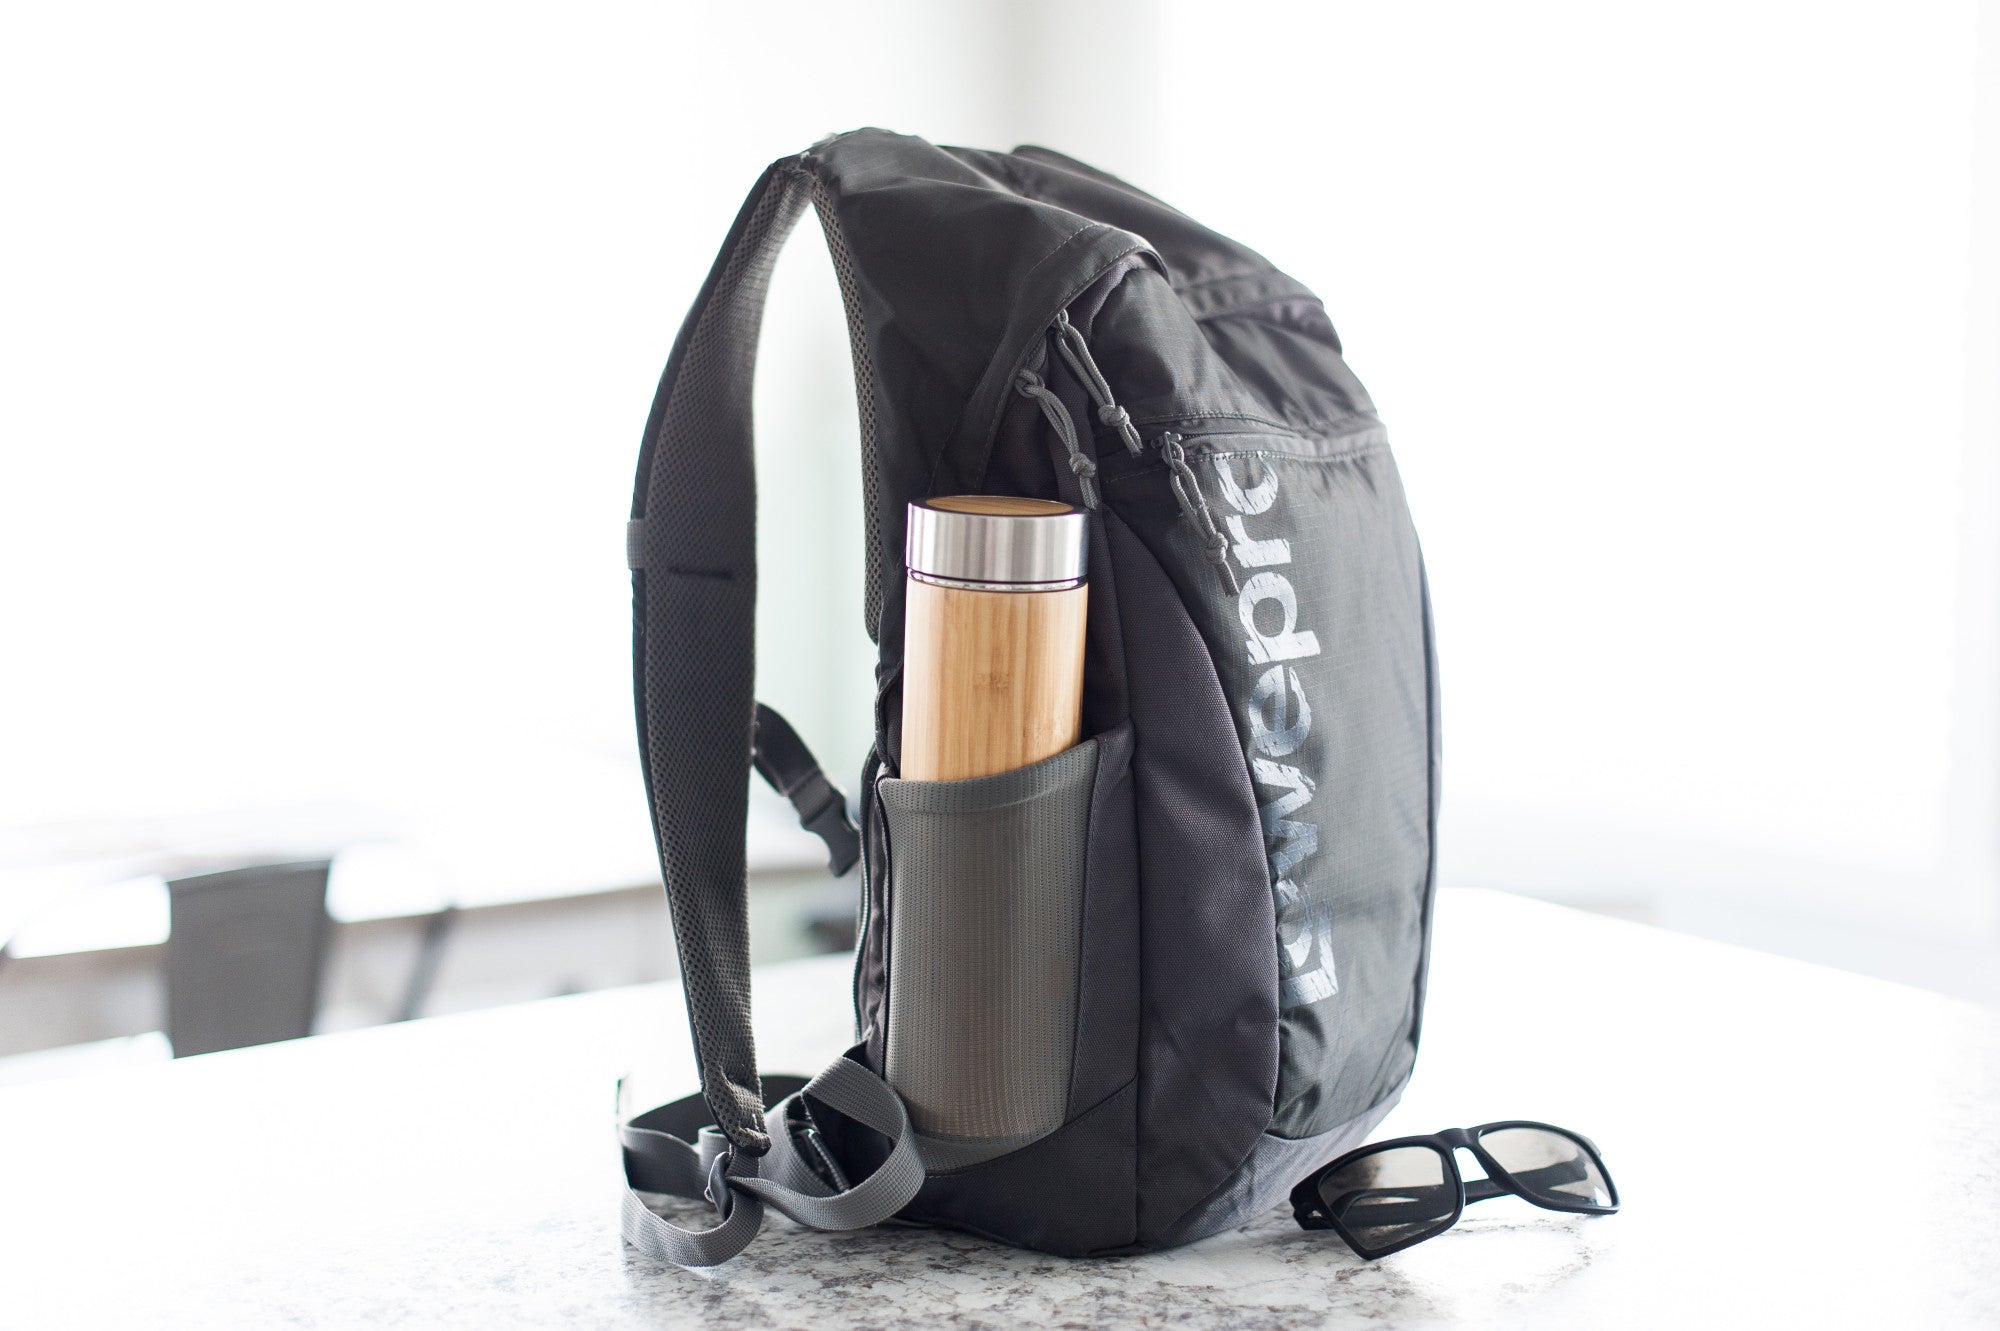 Personalized bamboo water bottle